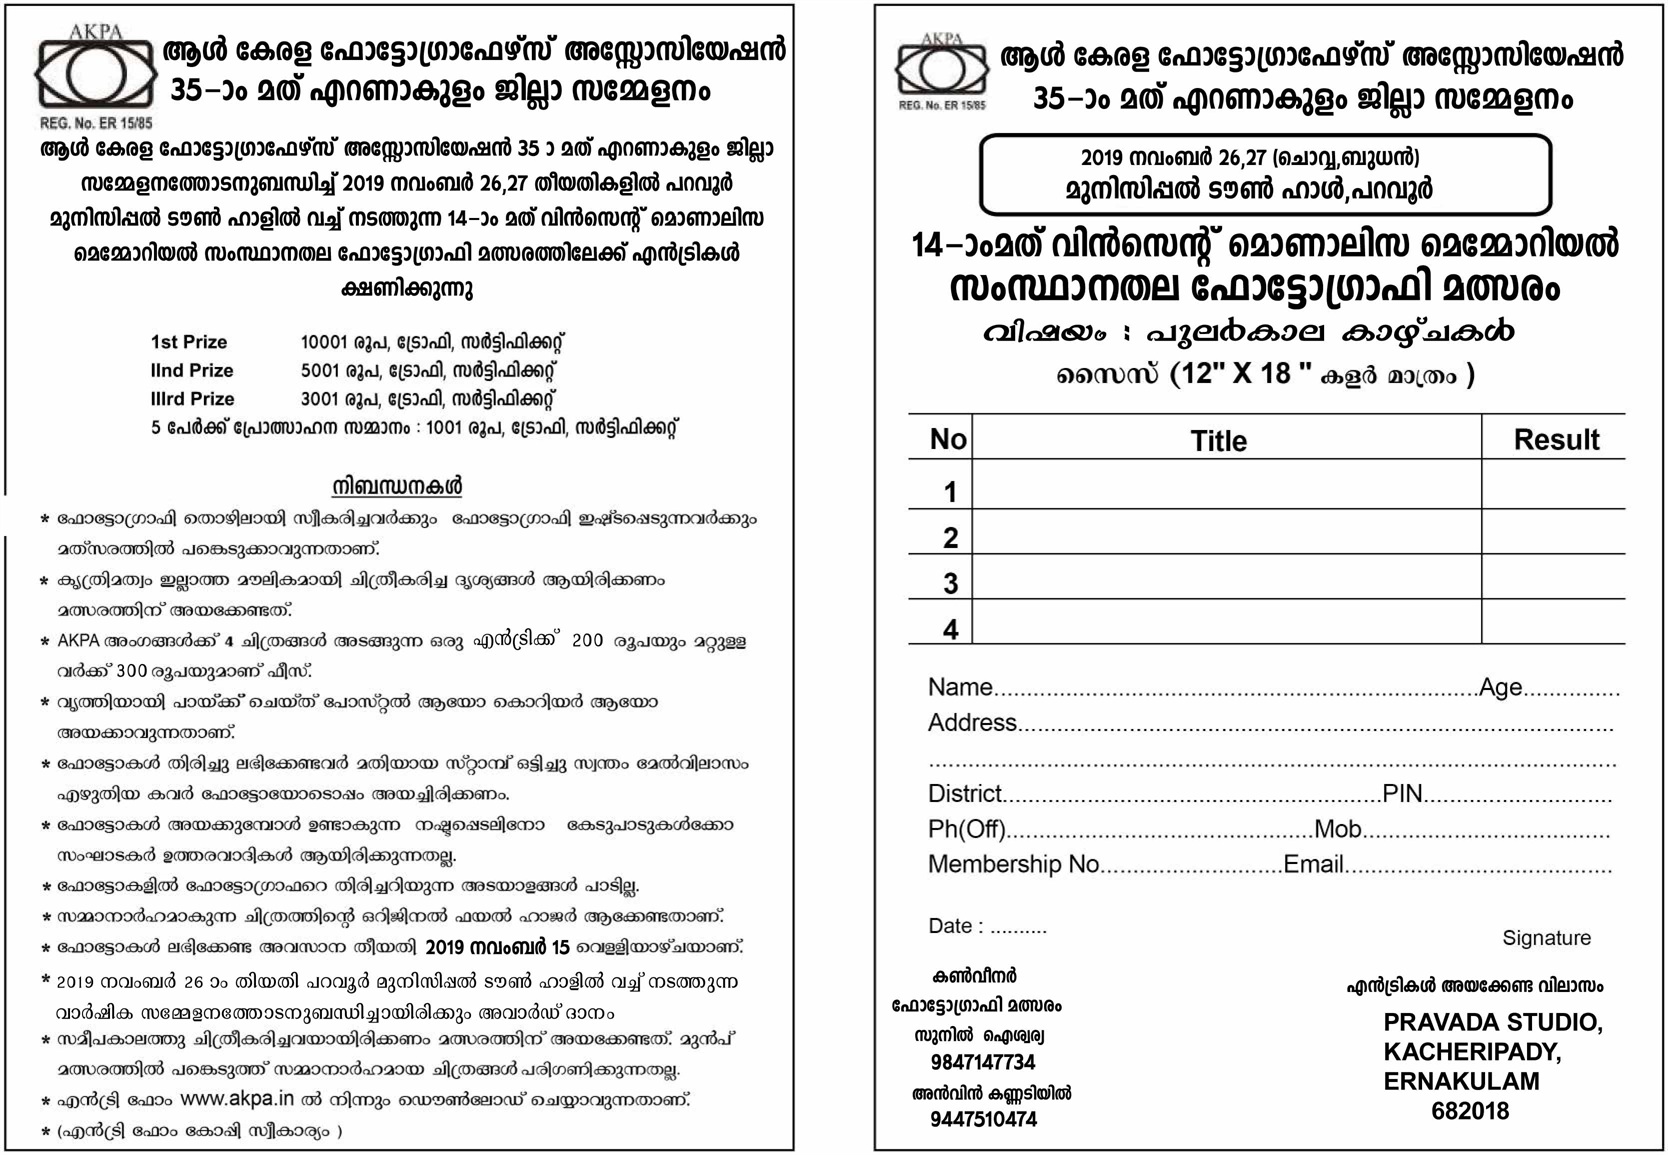 2019 ERNAKULAM DISTRICT PHOTOGRAPHY CONTEST